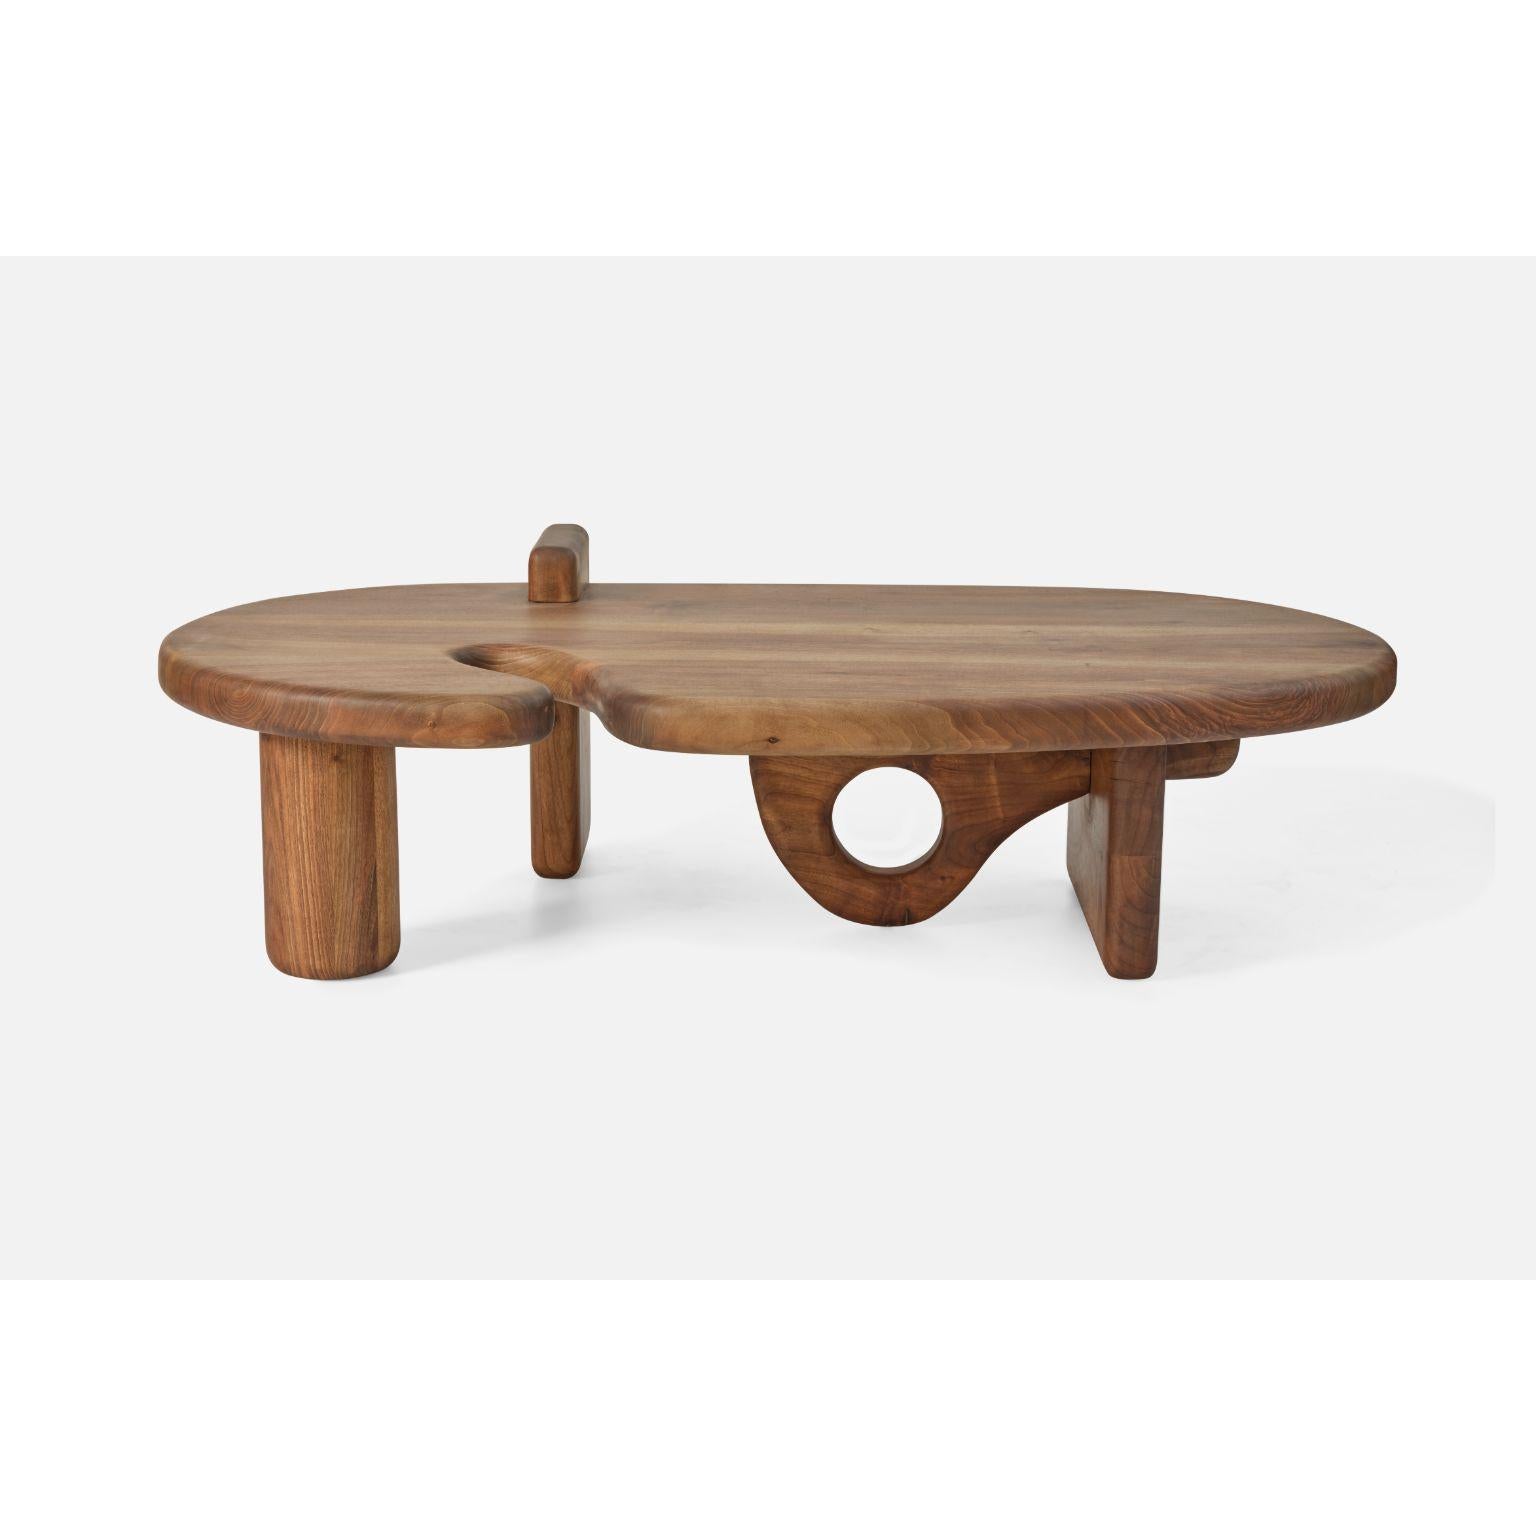 Selge Low Table by Contemporary Ecowood
Dimensions: W 94 x D 161 x H 41 cm.
Materials: American Clora Walnut.
Color: Natural.

Contemporary Ecowood’s story began in a craft workshop in 2009. Our wood passion made us focus on fallen trees in the